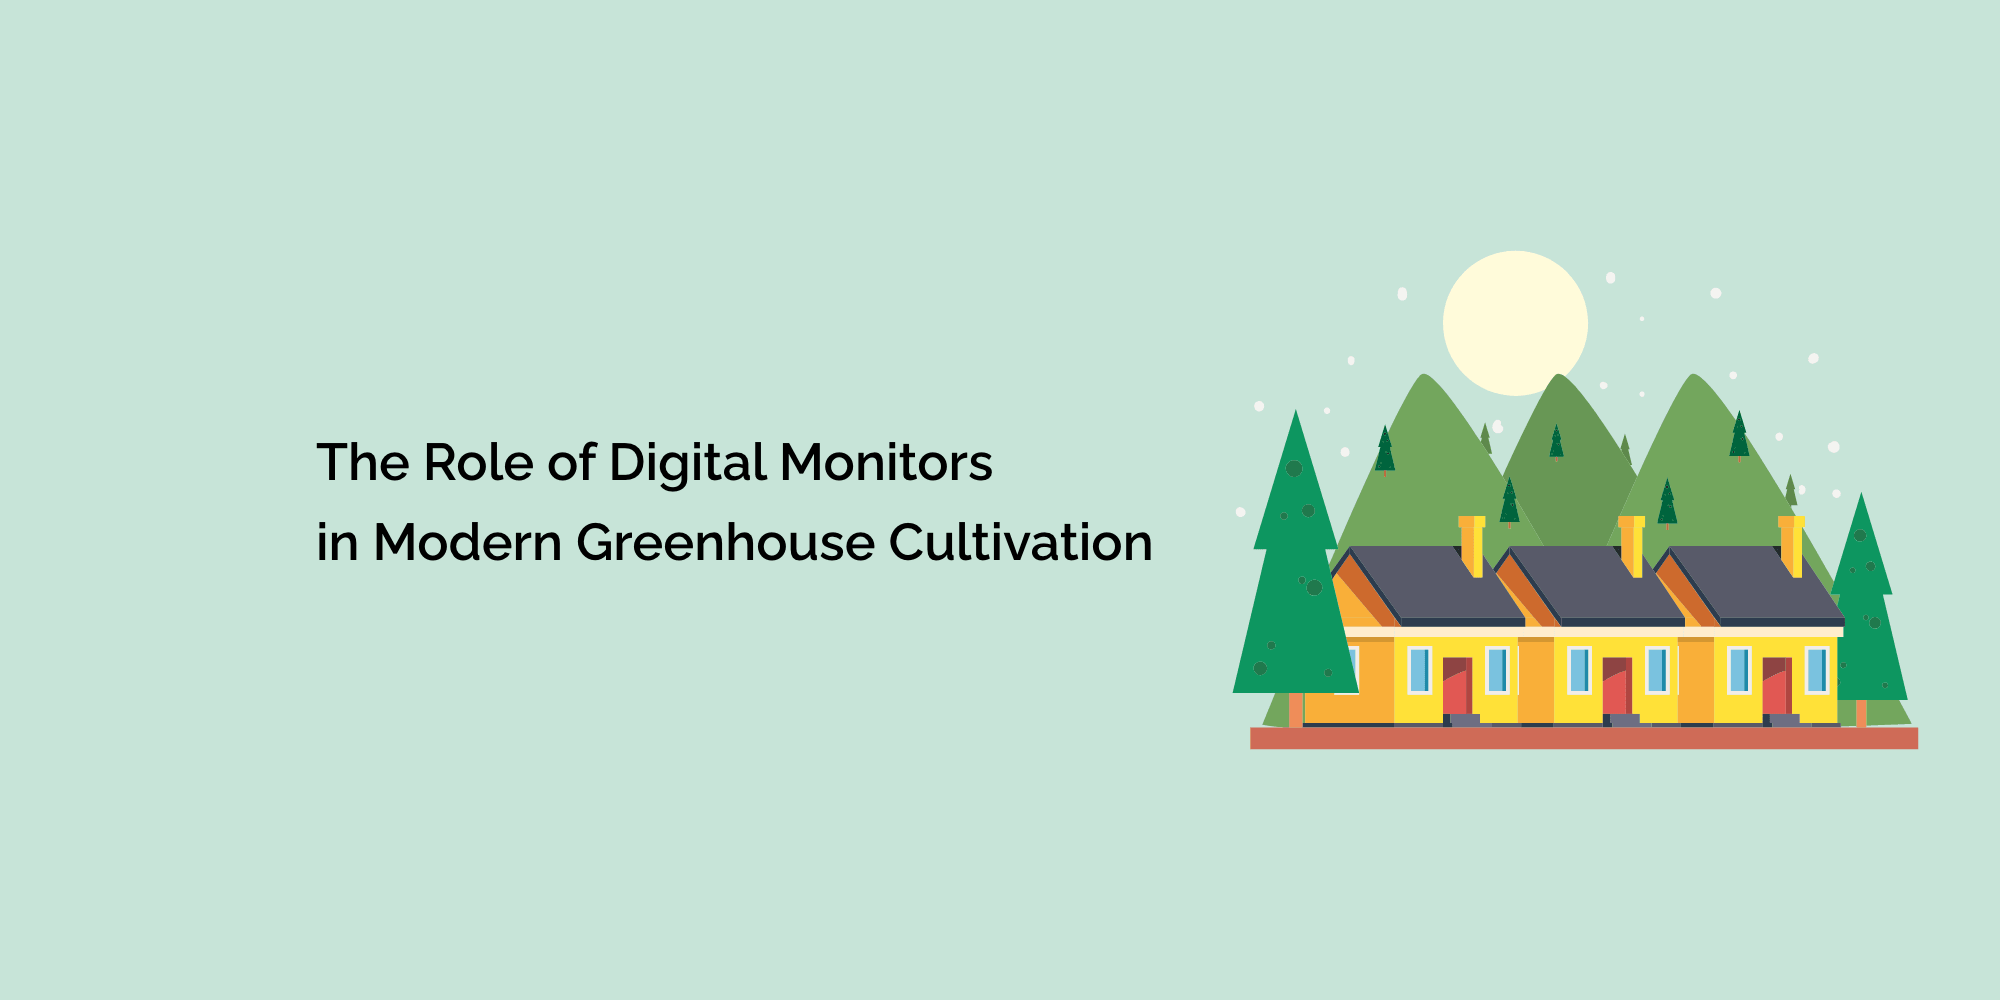 The Role of Digital Monitors in Modern Greenhouse Cultivation